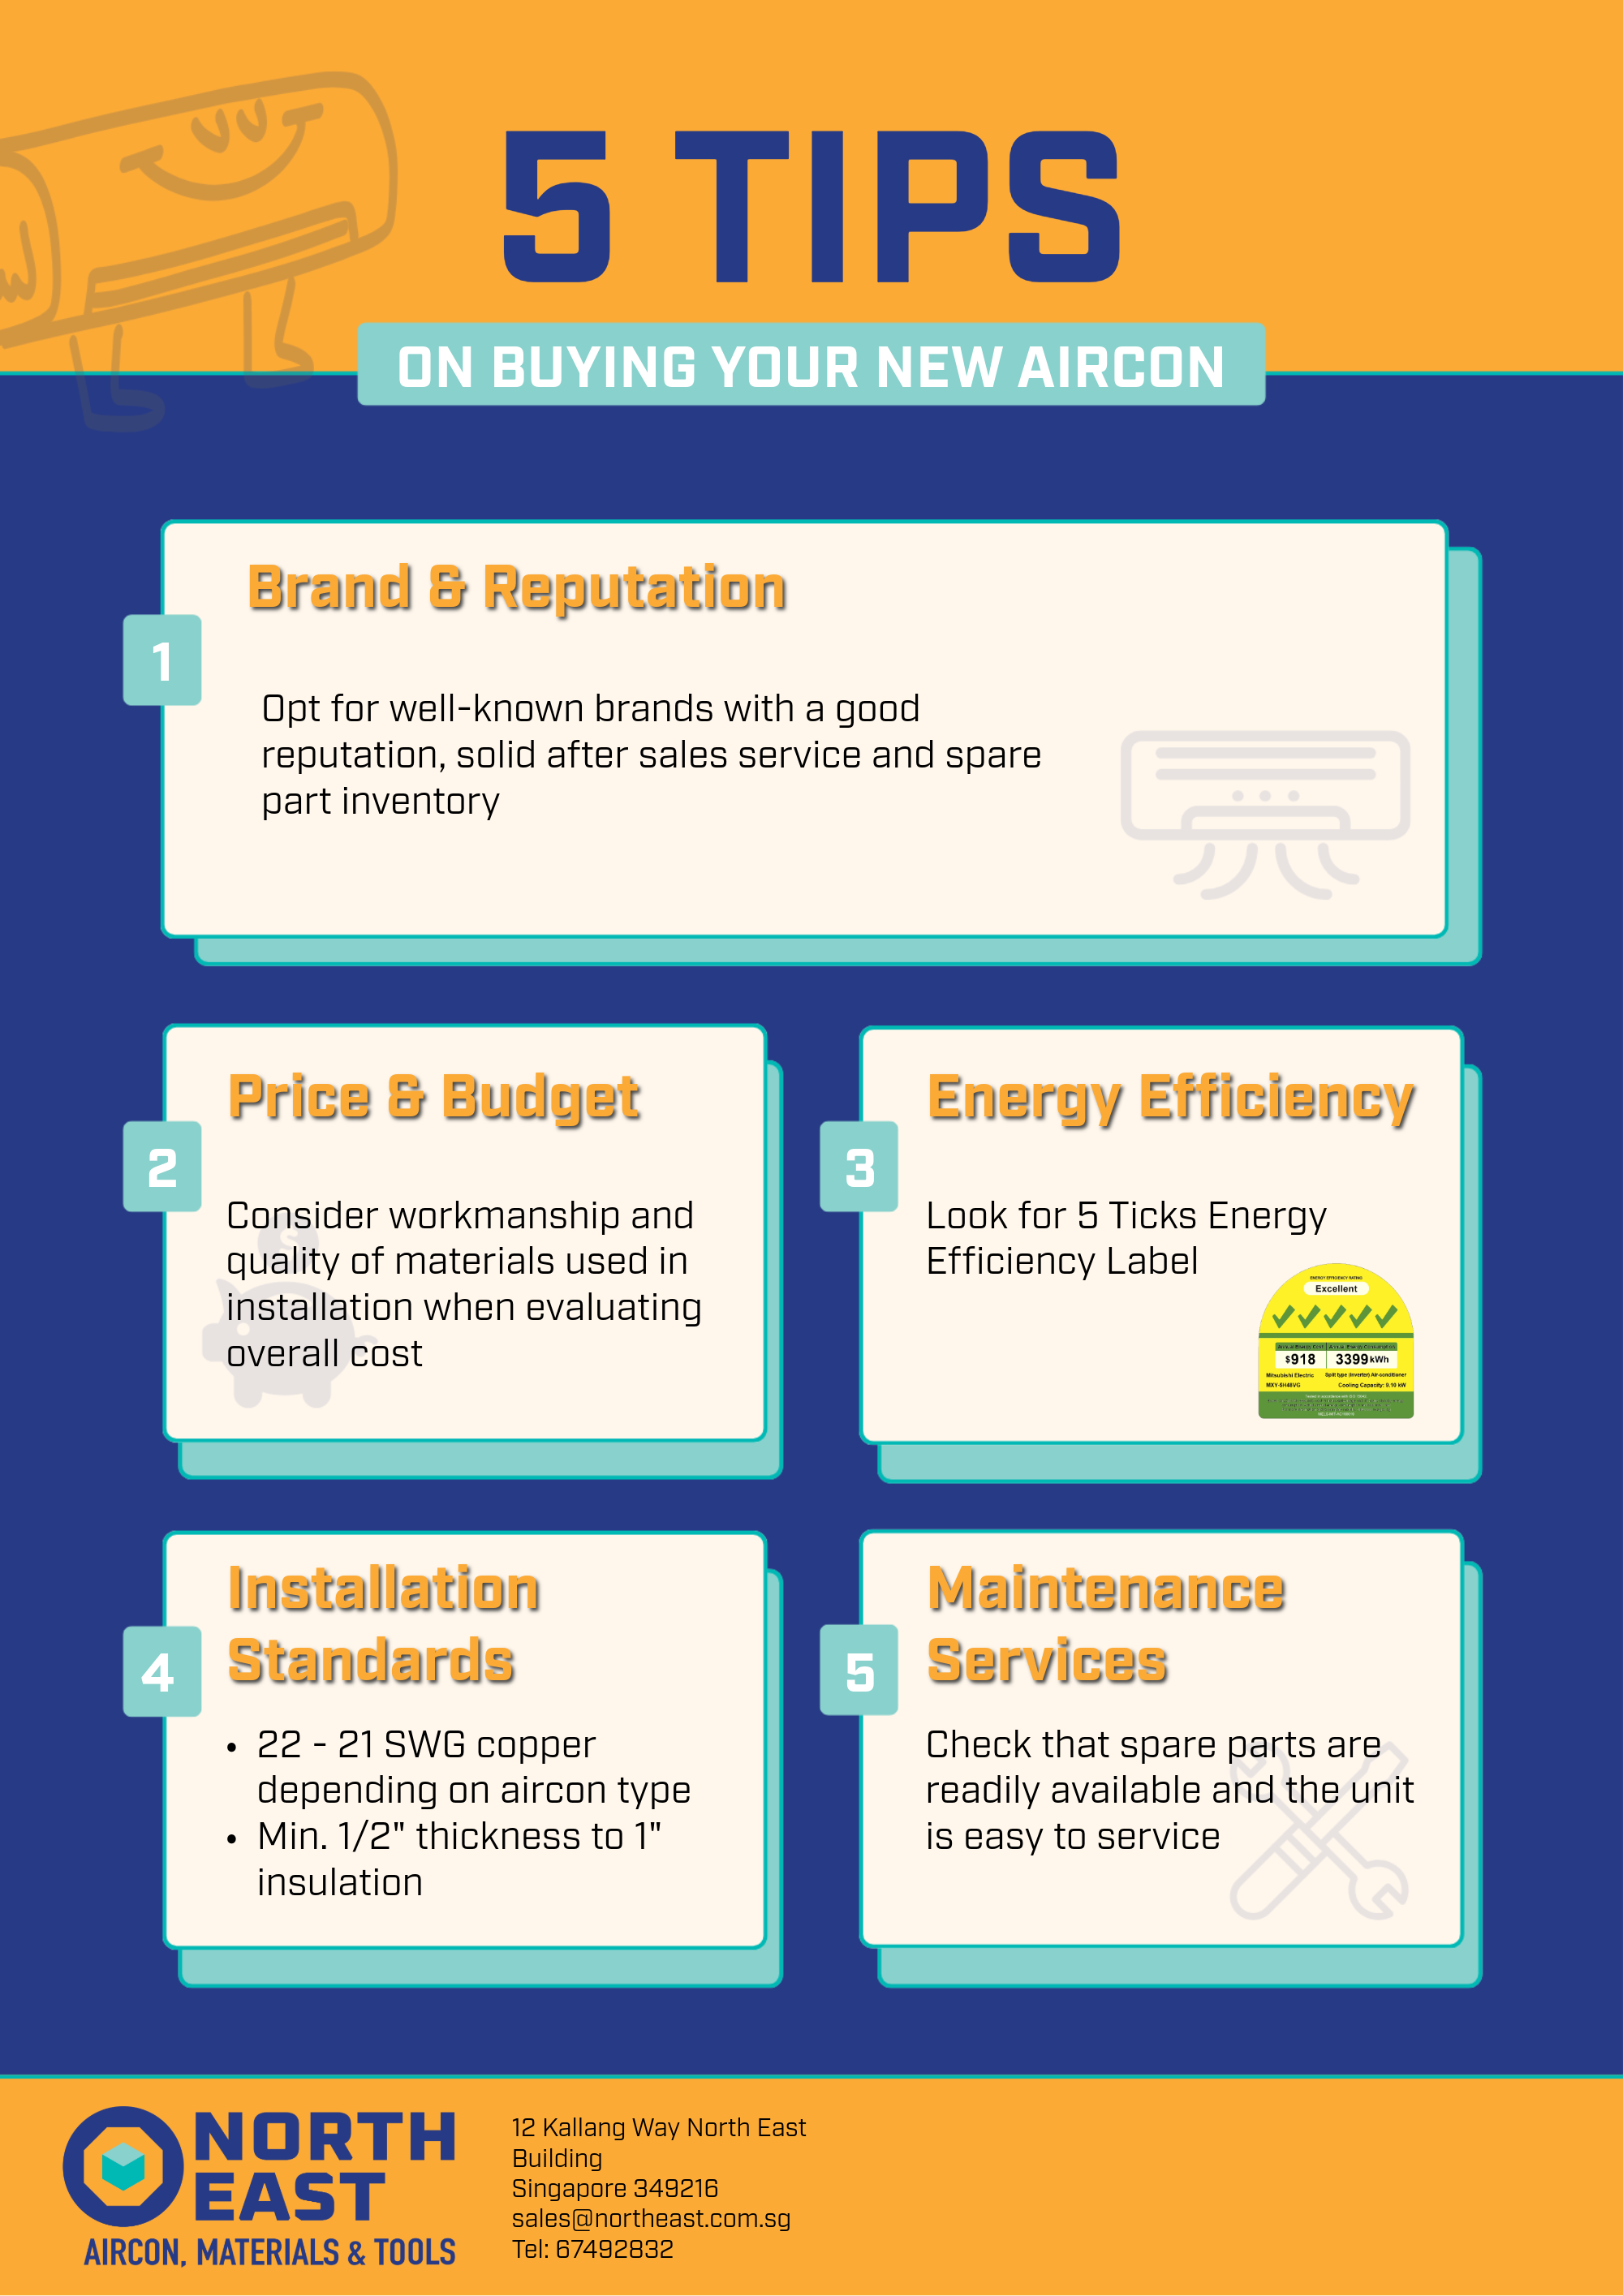 5 Tips on Buying Your New Aircon